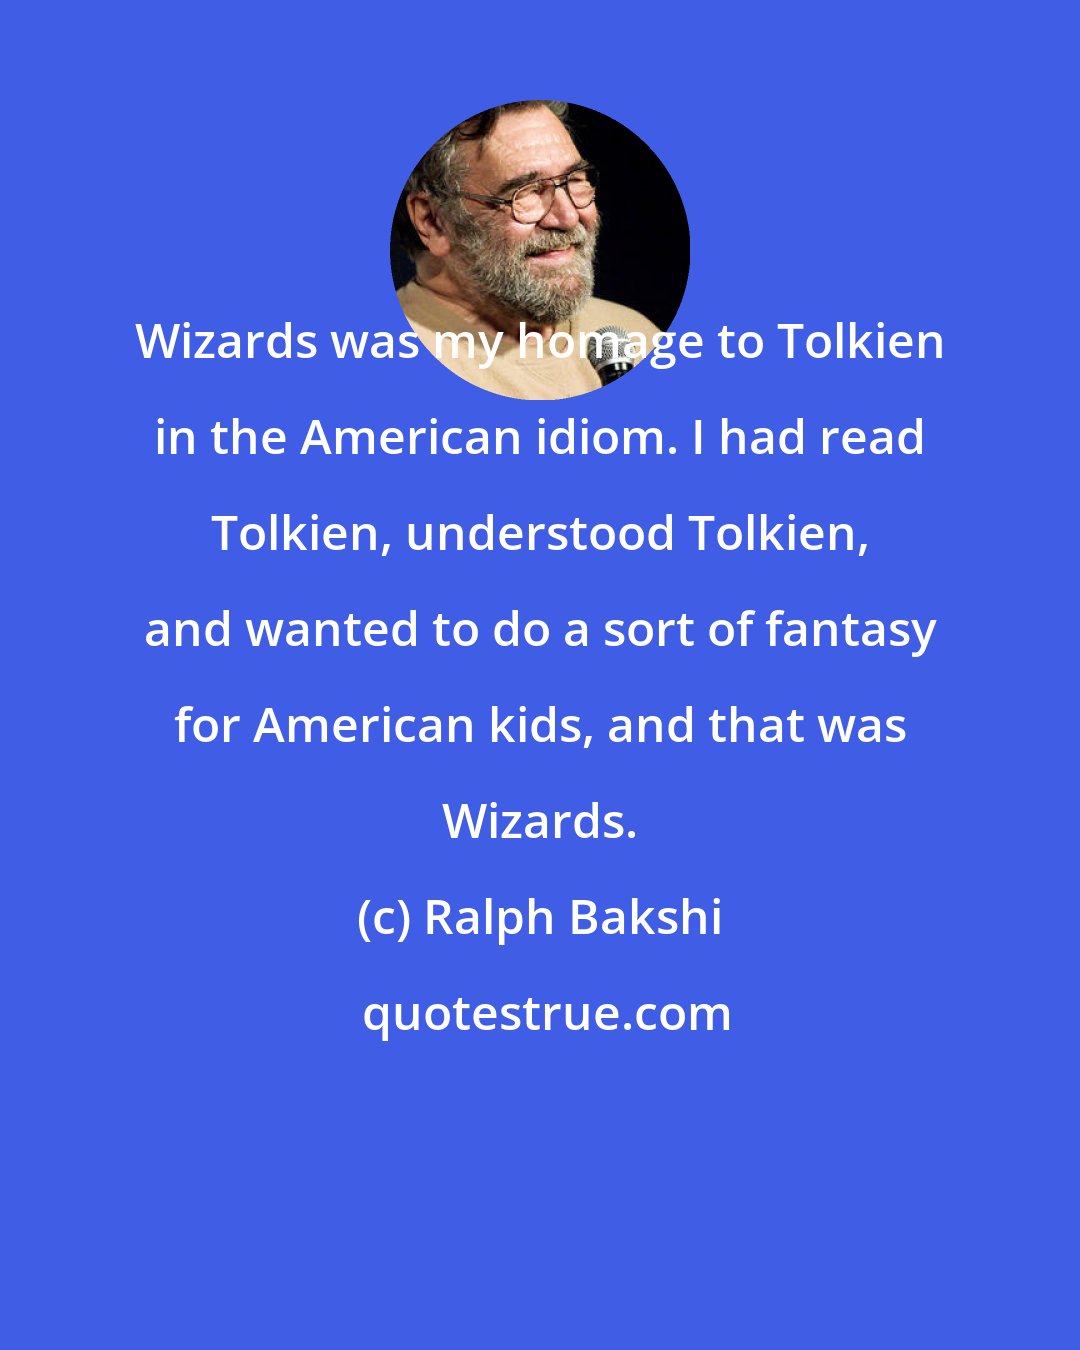 Ralph Bakshi: Wizards was my homage to Tolkien in the American idiom. I had read Tolkien, understood Tolkien, and wanted to do a sort of fantasy for American kids, and that was Wizards.